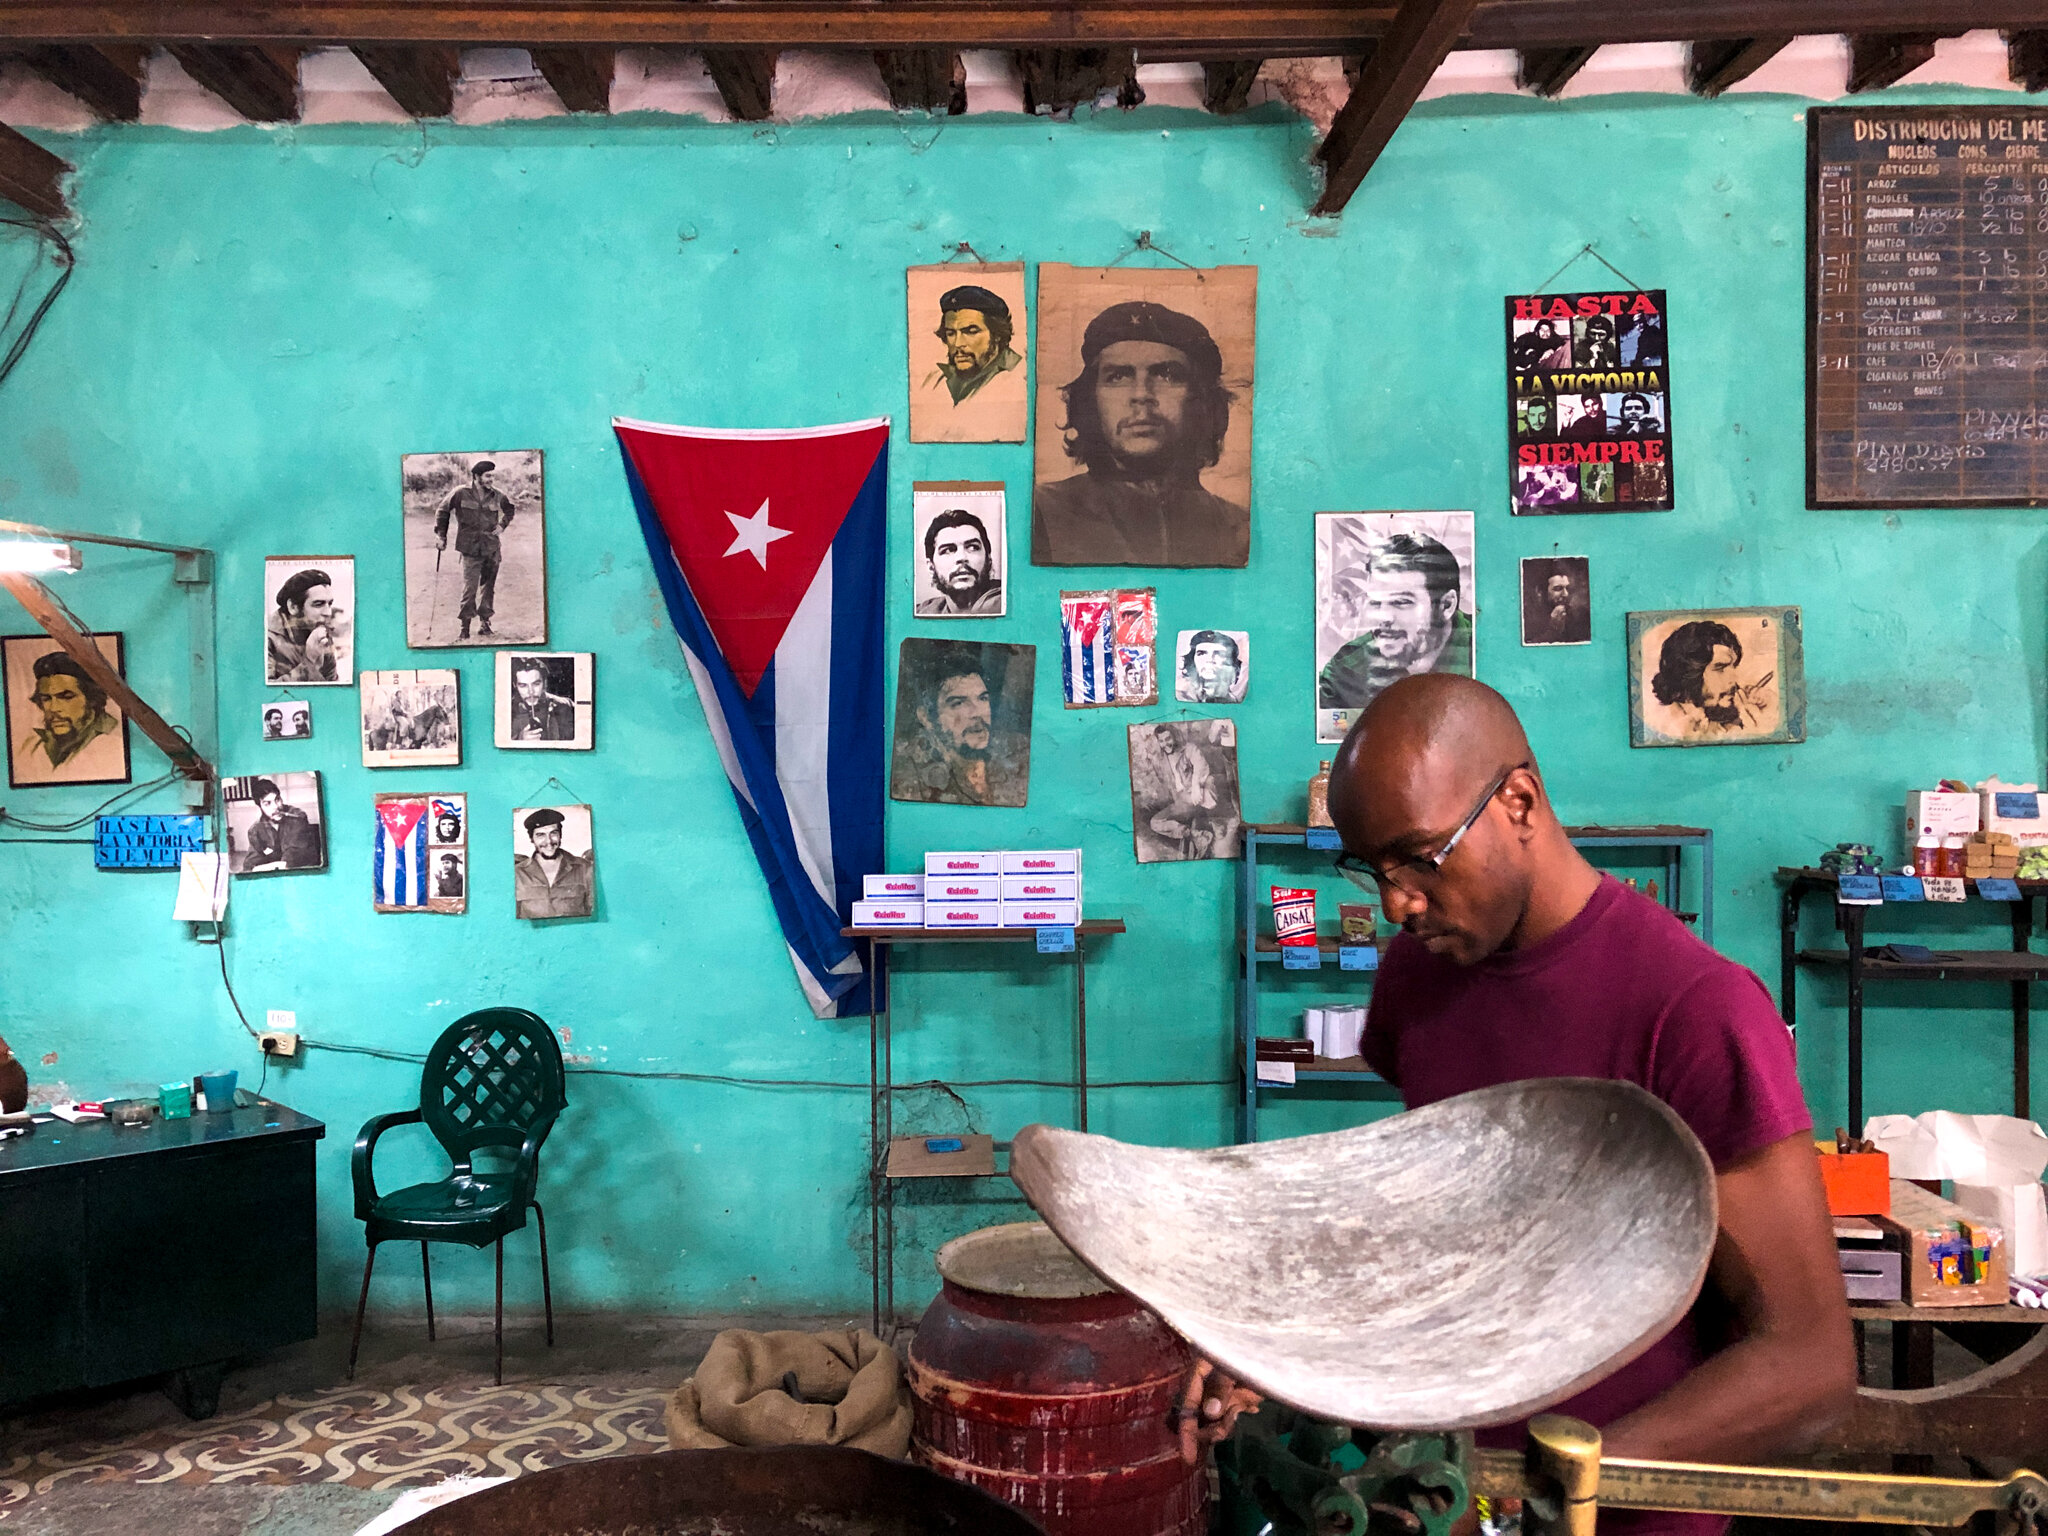  A Cuban man working in a bodega in Havana © James Clifford Kent   Over the course of its three-month run, This is Cuba was visited by over 3,000 people, including academics, curators, diplomats, filmmakers, journalists, photographers, students, scho